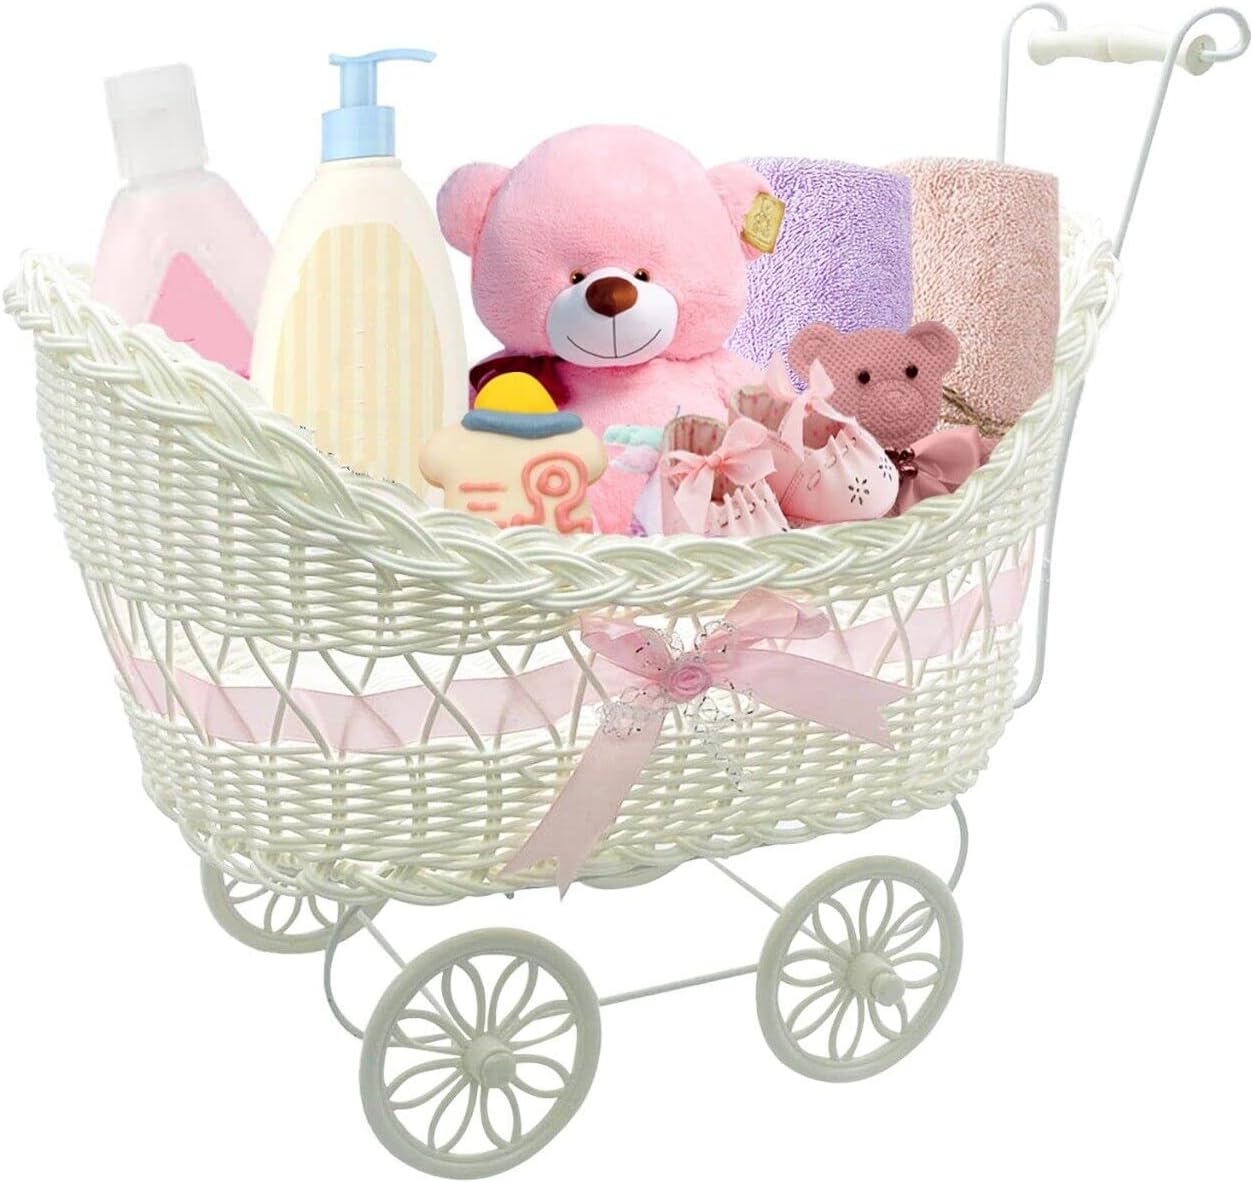 SAFRI Baby Pram Hamper Wicker Toy Basket with Handles and Wheels Great Gift for Boy & Girl Baby Showers or Newborn Baby Gifts (Pink)